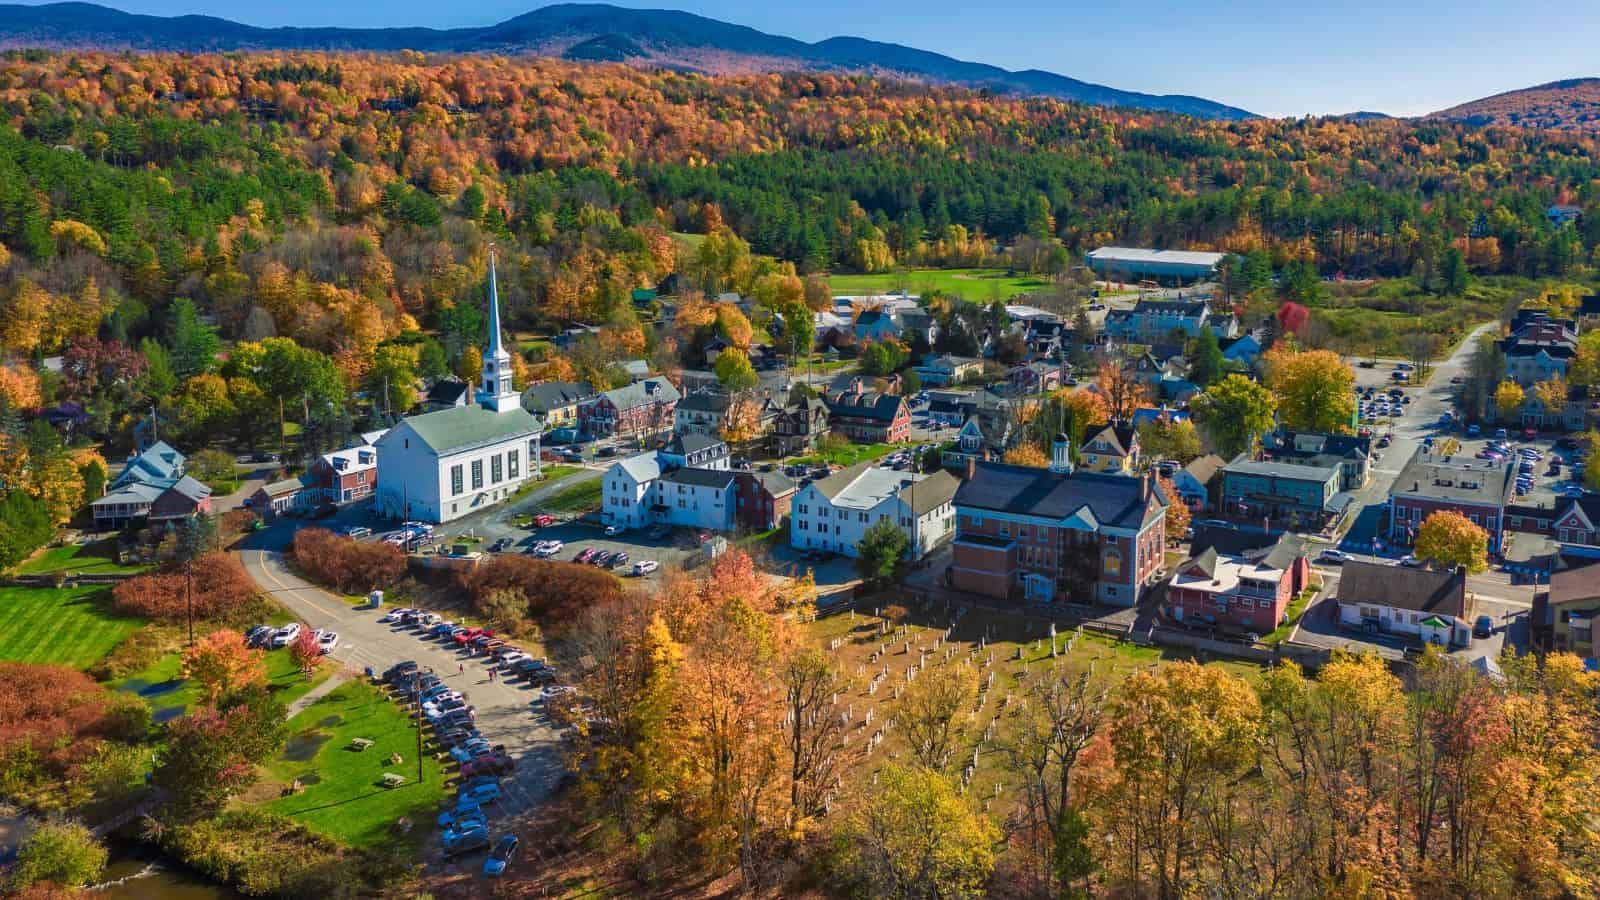 <p>One of the most popular skiing destinations in Vermont, Stowe has retained its small-town vibe despite its tourism. <a href="https://abcnews.go.com/Entertainment/revisiting-sound-musics-real-von-trapps-run-vermont/story?id=29674261">ABC</a> reminds us that Stowe became famous after appearing in The Sound of Music, but it also has much more outdoor activity to offer and is a popular destination for rock climbing and ziplining.</p>